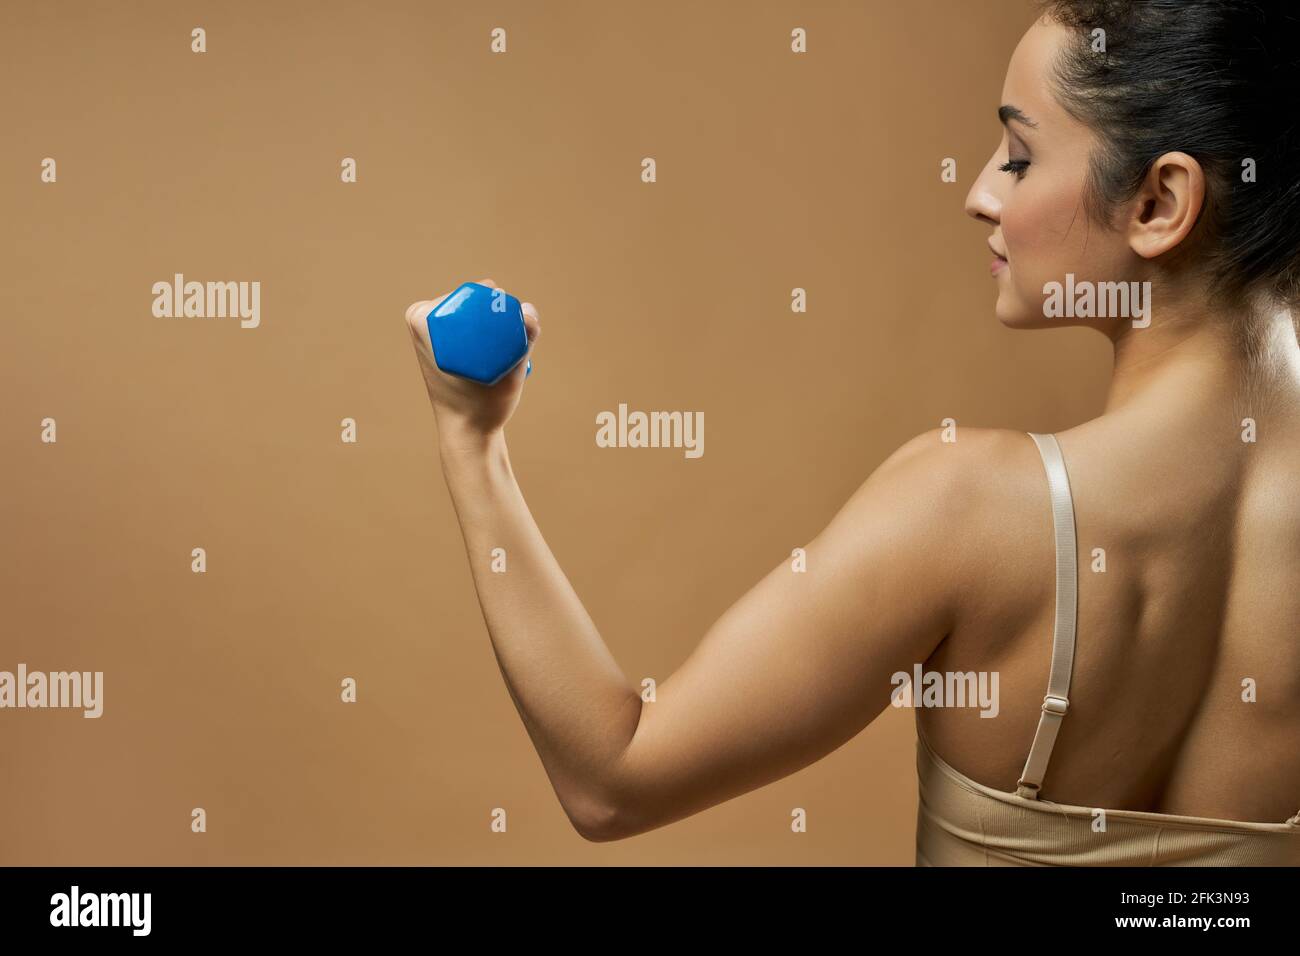 Athletic young woman doing exercise with dumbbell Stock Photo